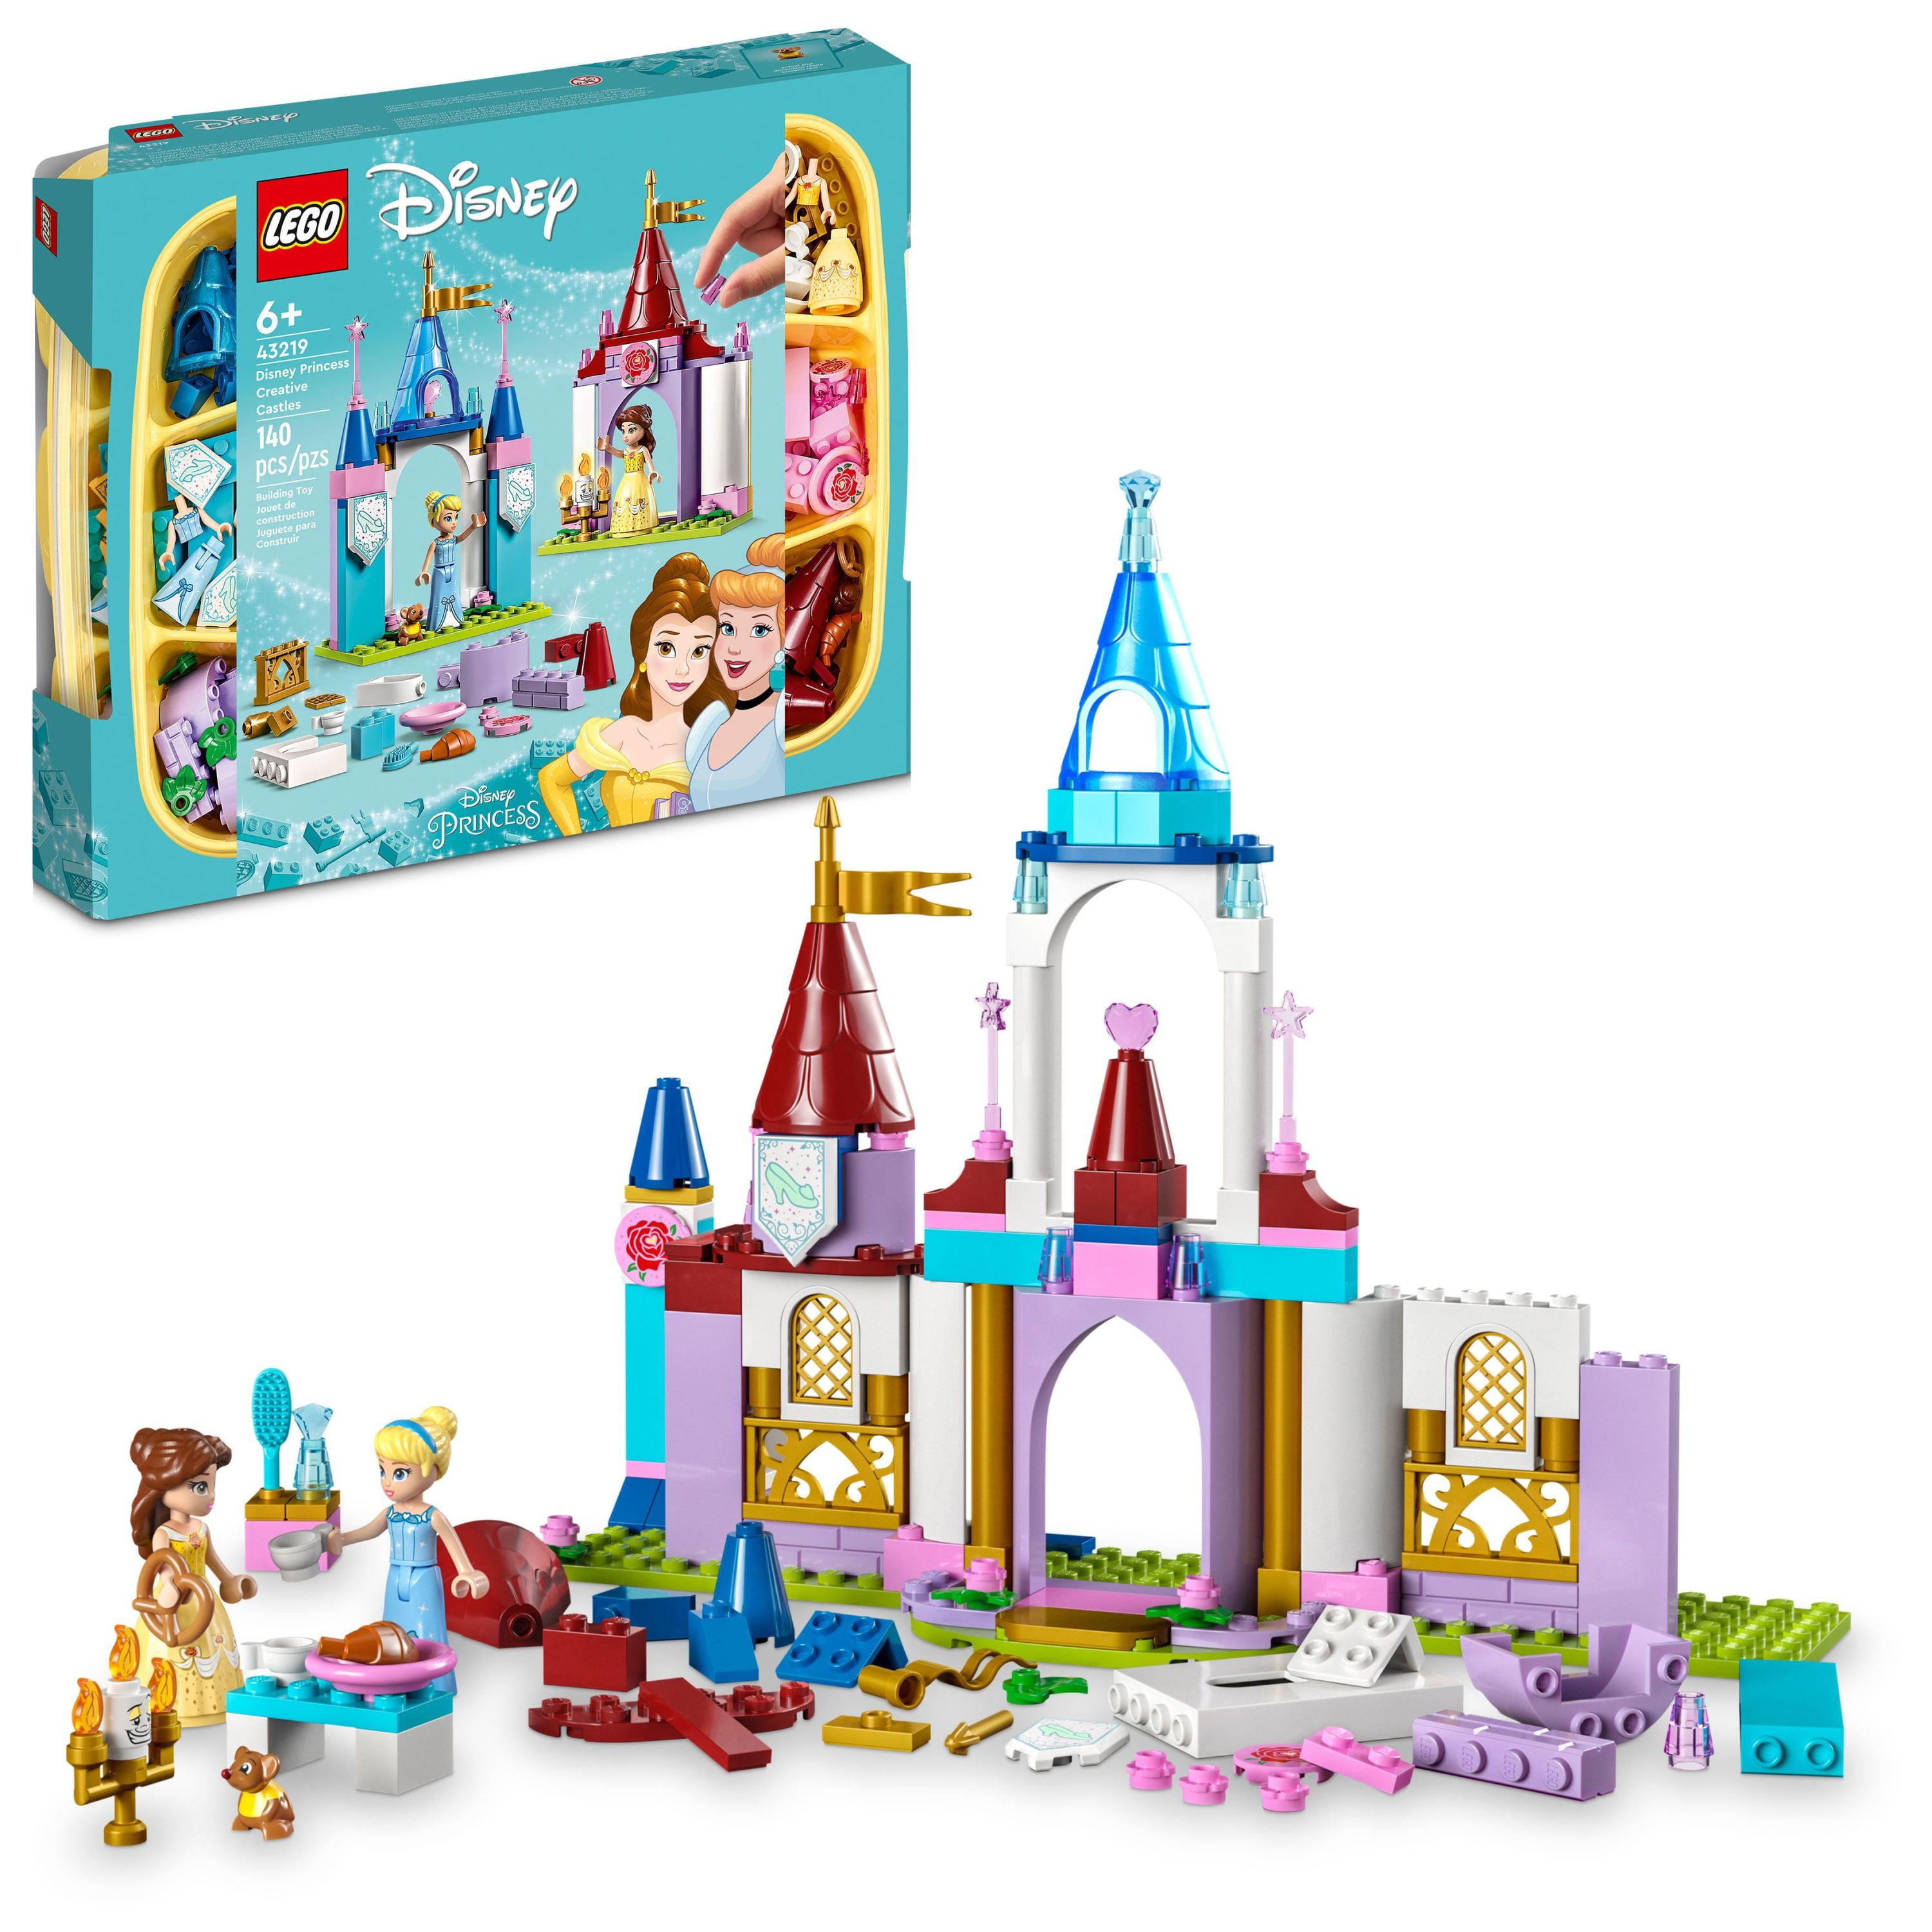 Girls Building Blocks Set Toy, 25-in-1 Princess Toys for Girls Age